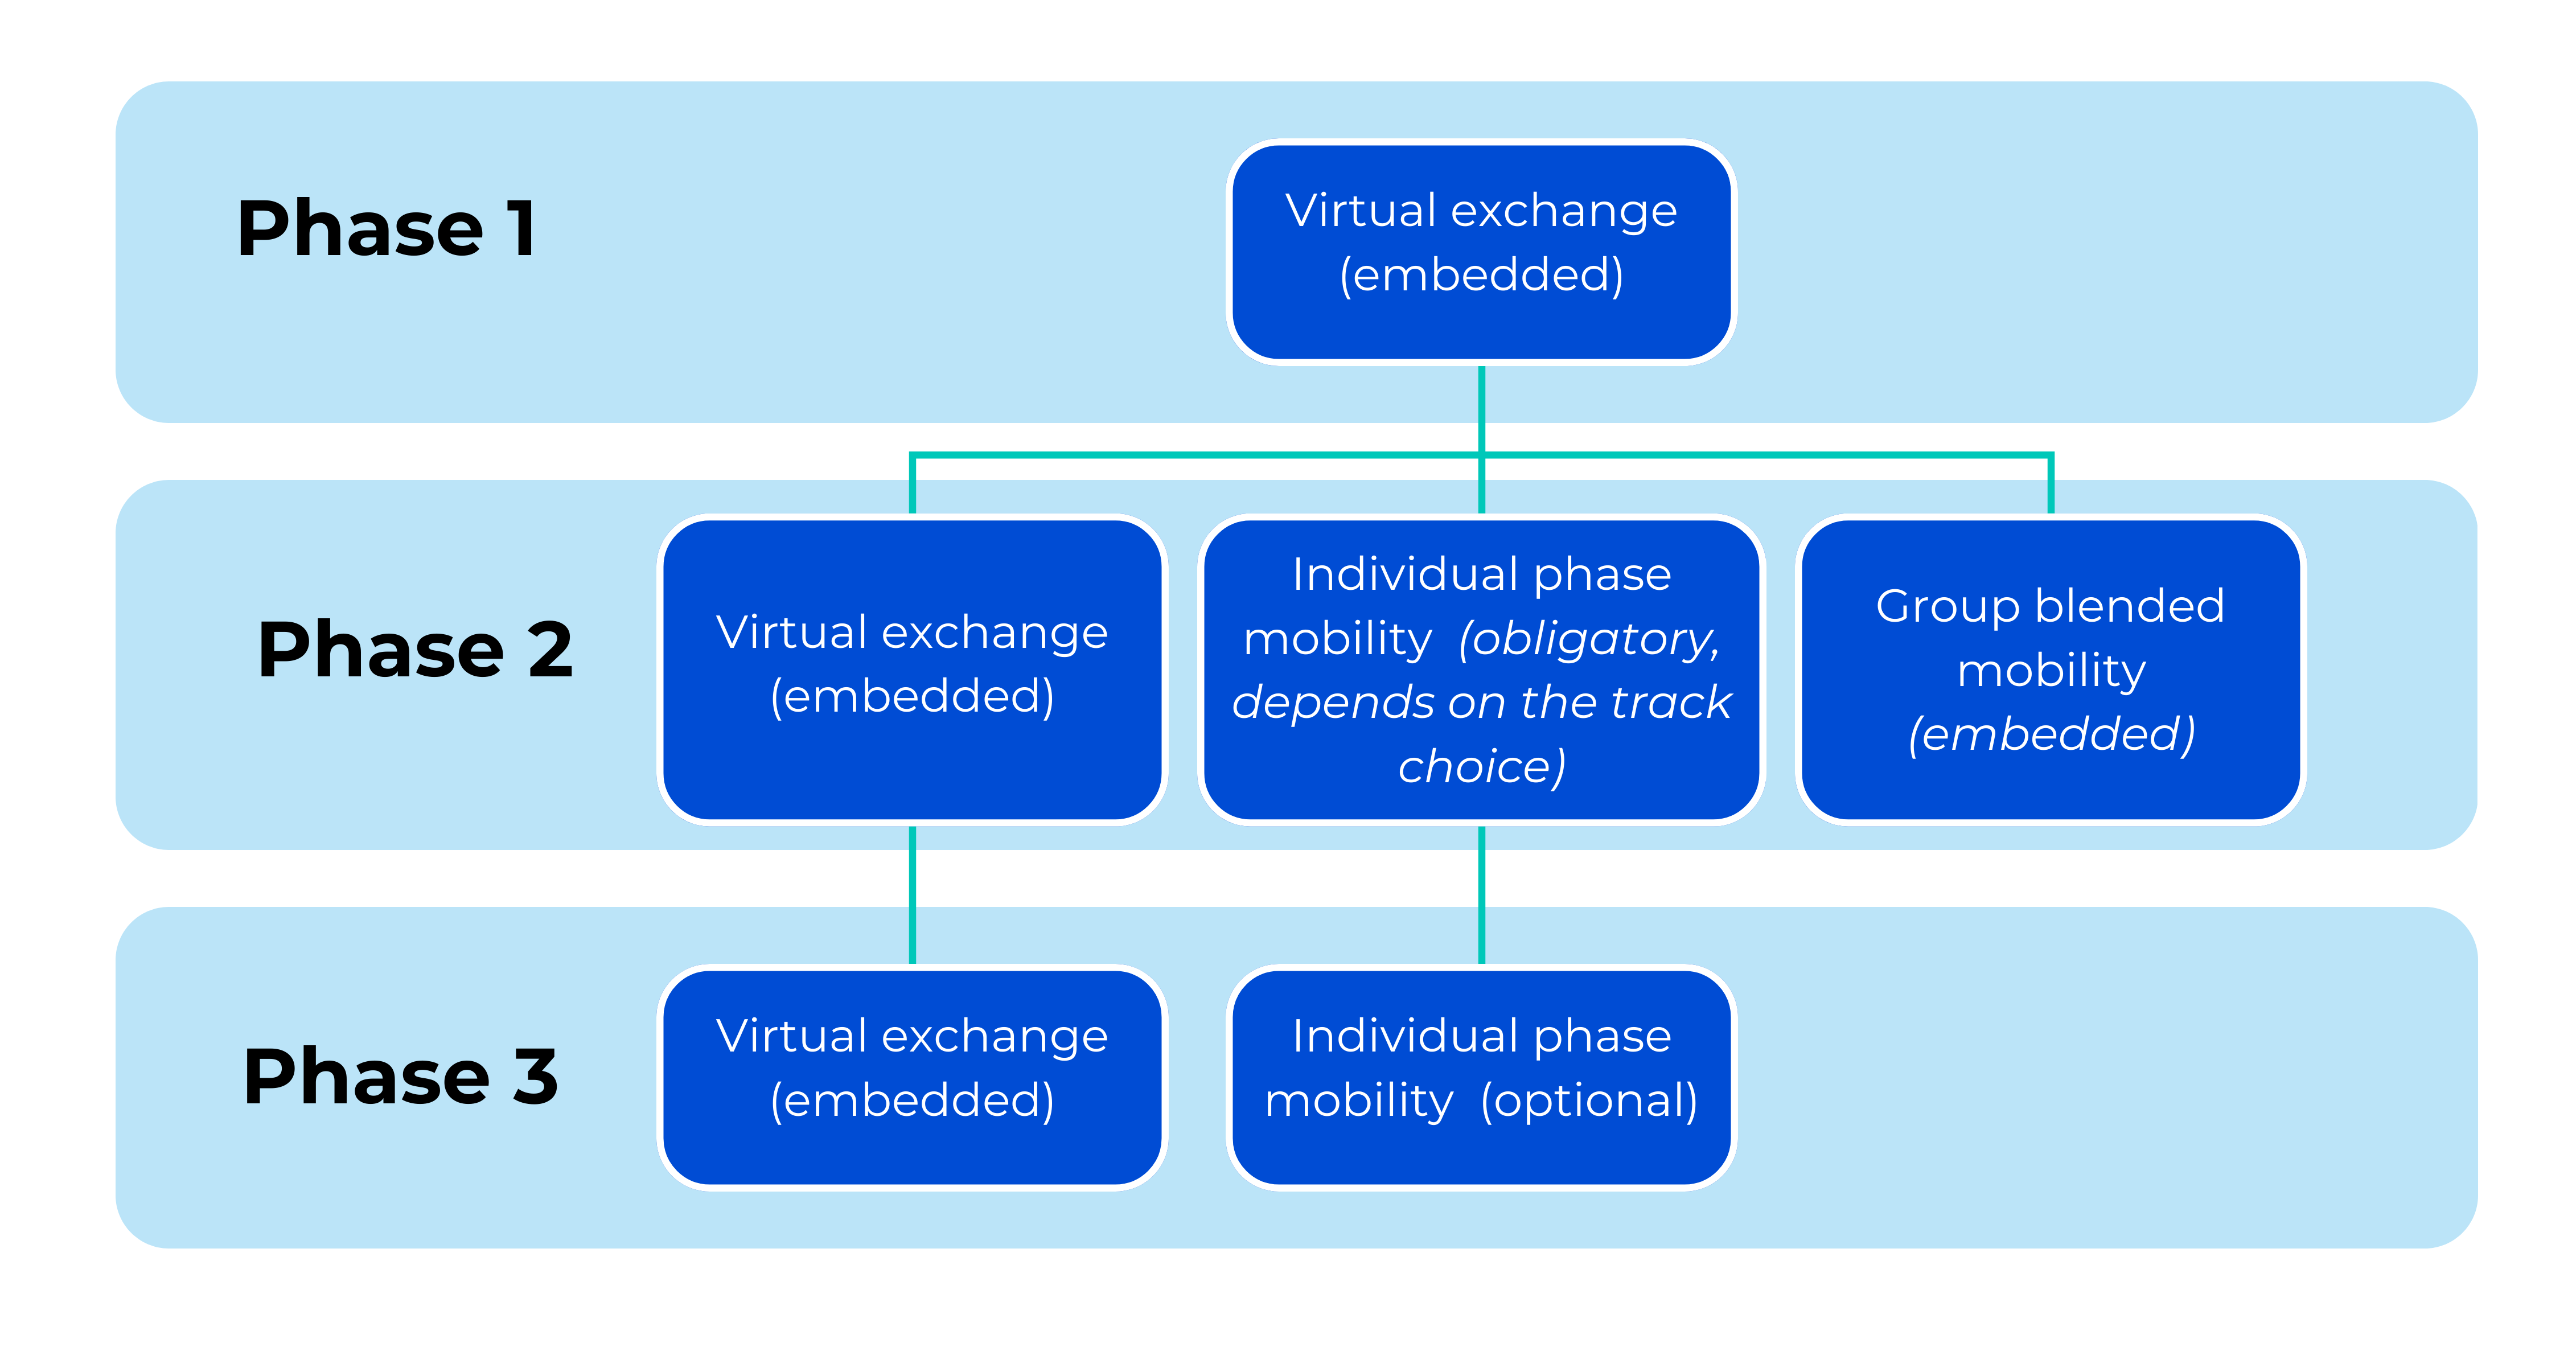 Phase 1 - Virtual exchange (embedded), then we go to Phase 2: Virtual Exchange (embedded), Individual phase mobility (obligatory, depends on the track choice), group blended mobility (embedded), then in phase 3 - Vitural exchange (embeded) and individual phase mobility (optional). 